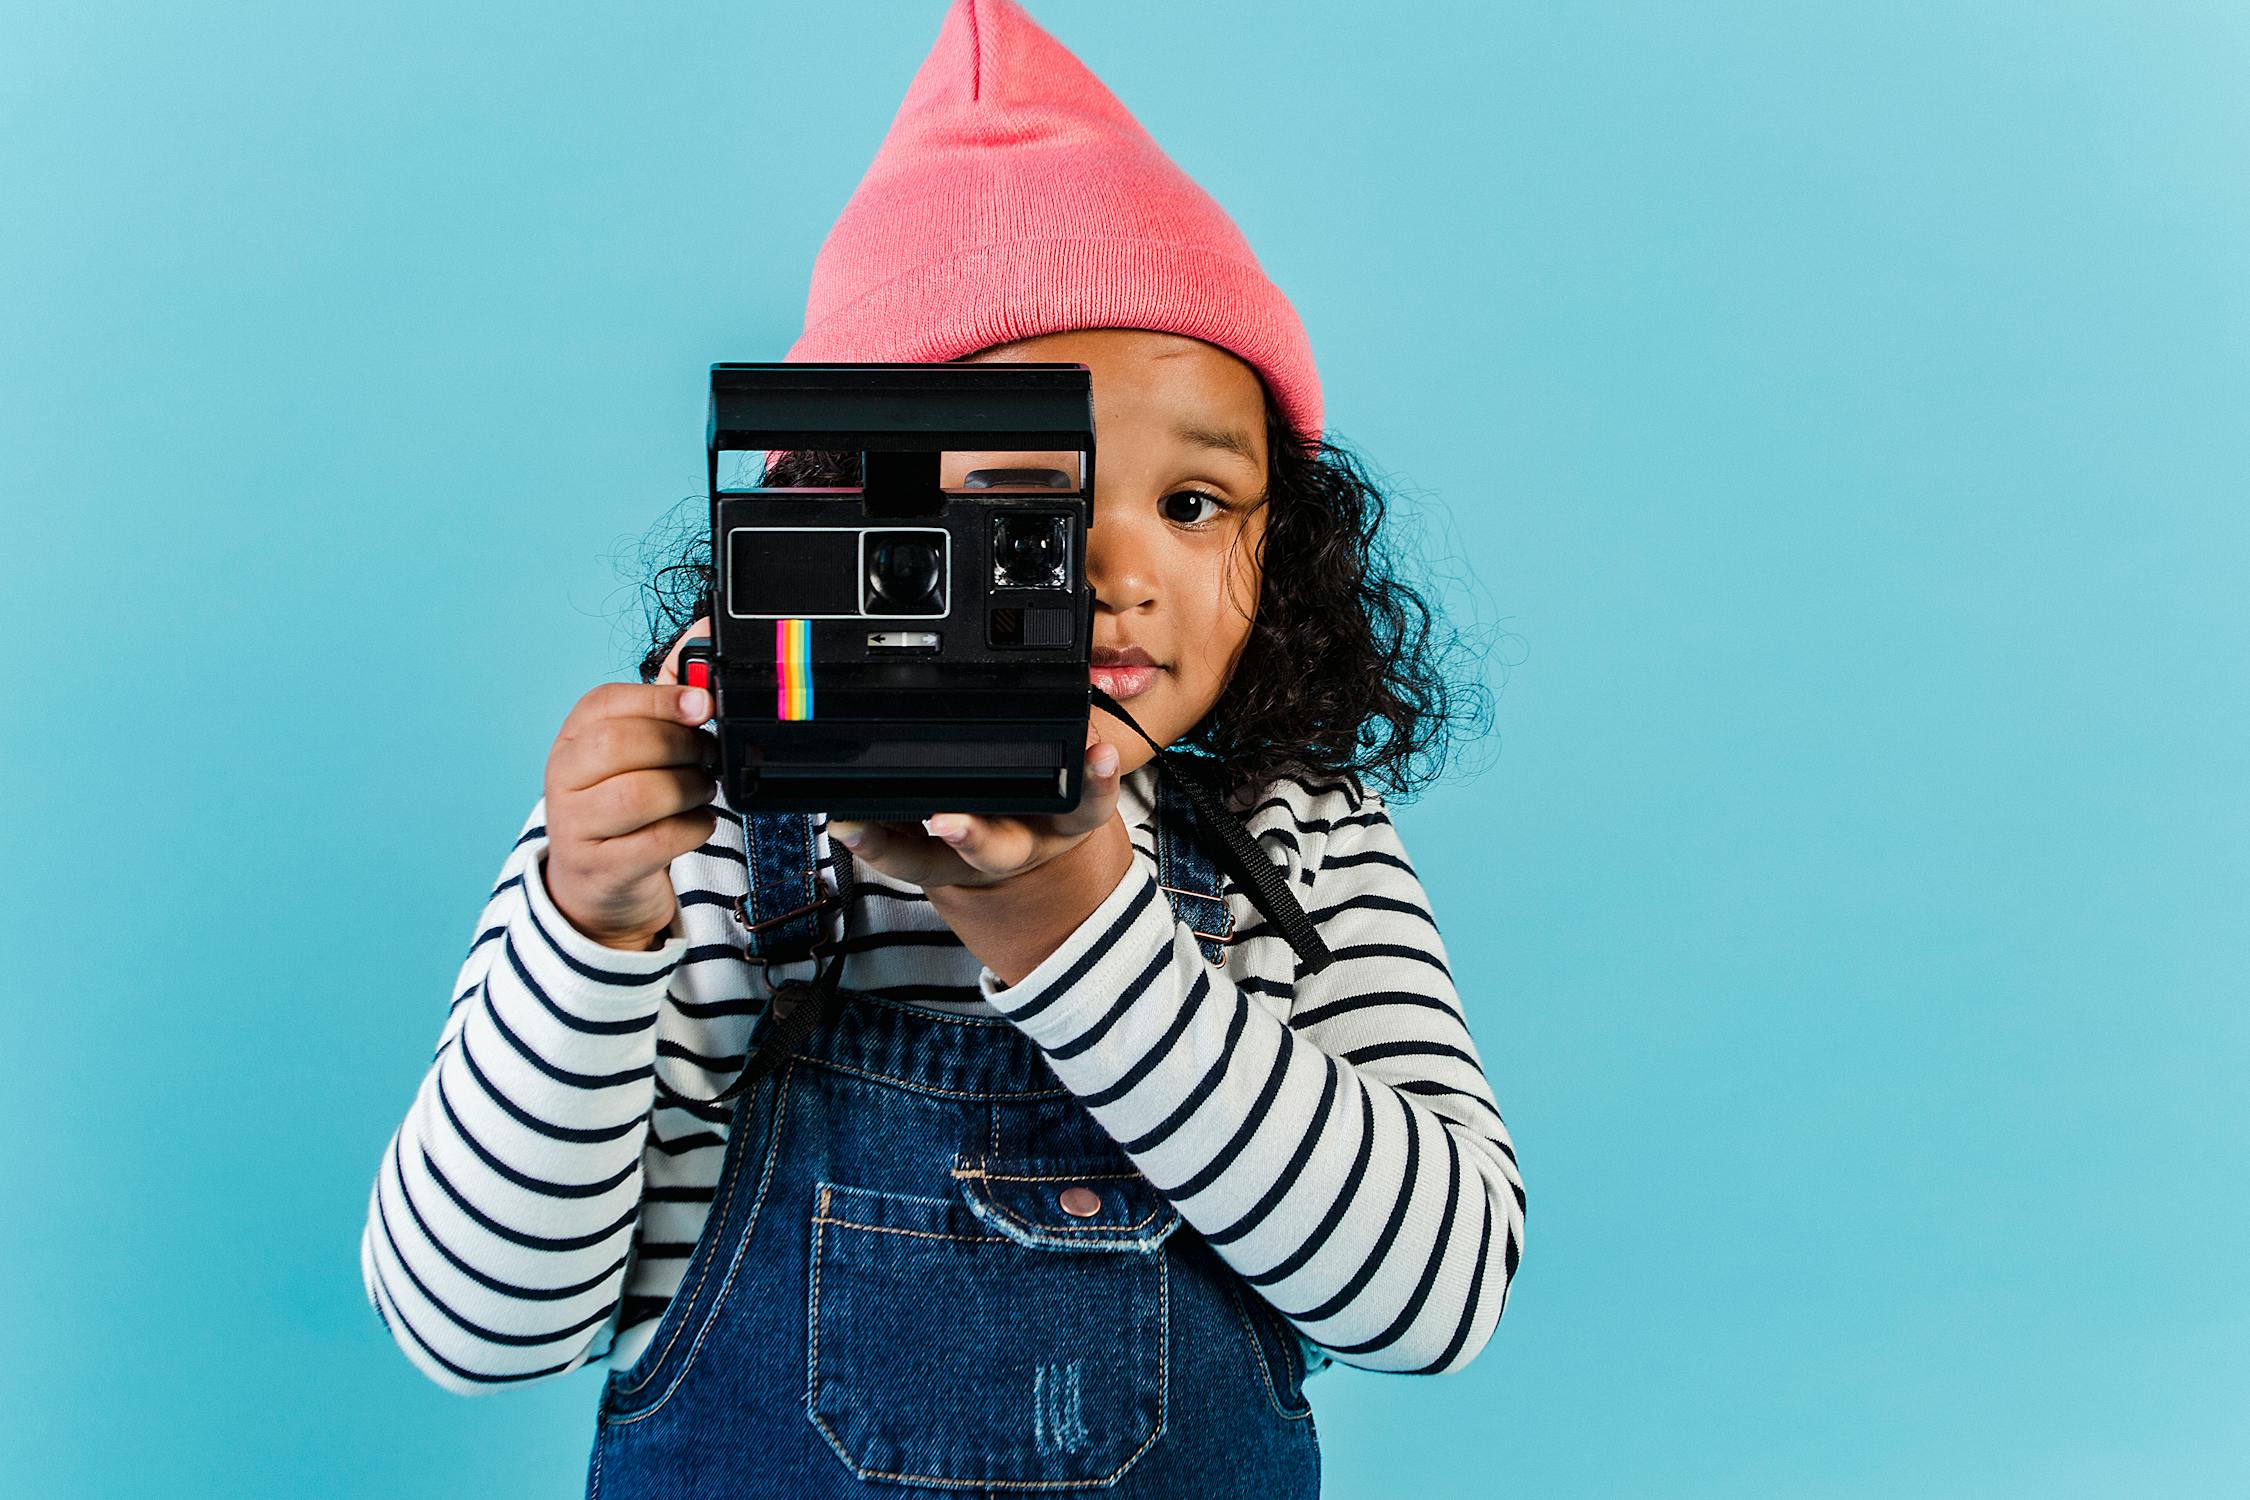 Photo by Amina Filkins from Pexels: https://www.pexels.com/photo/sweet-black-girl-taking-pictures-on-film-camera-5561461/